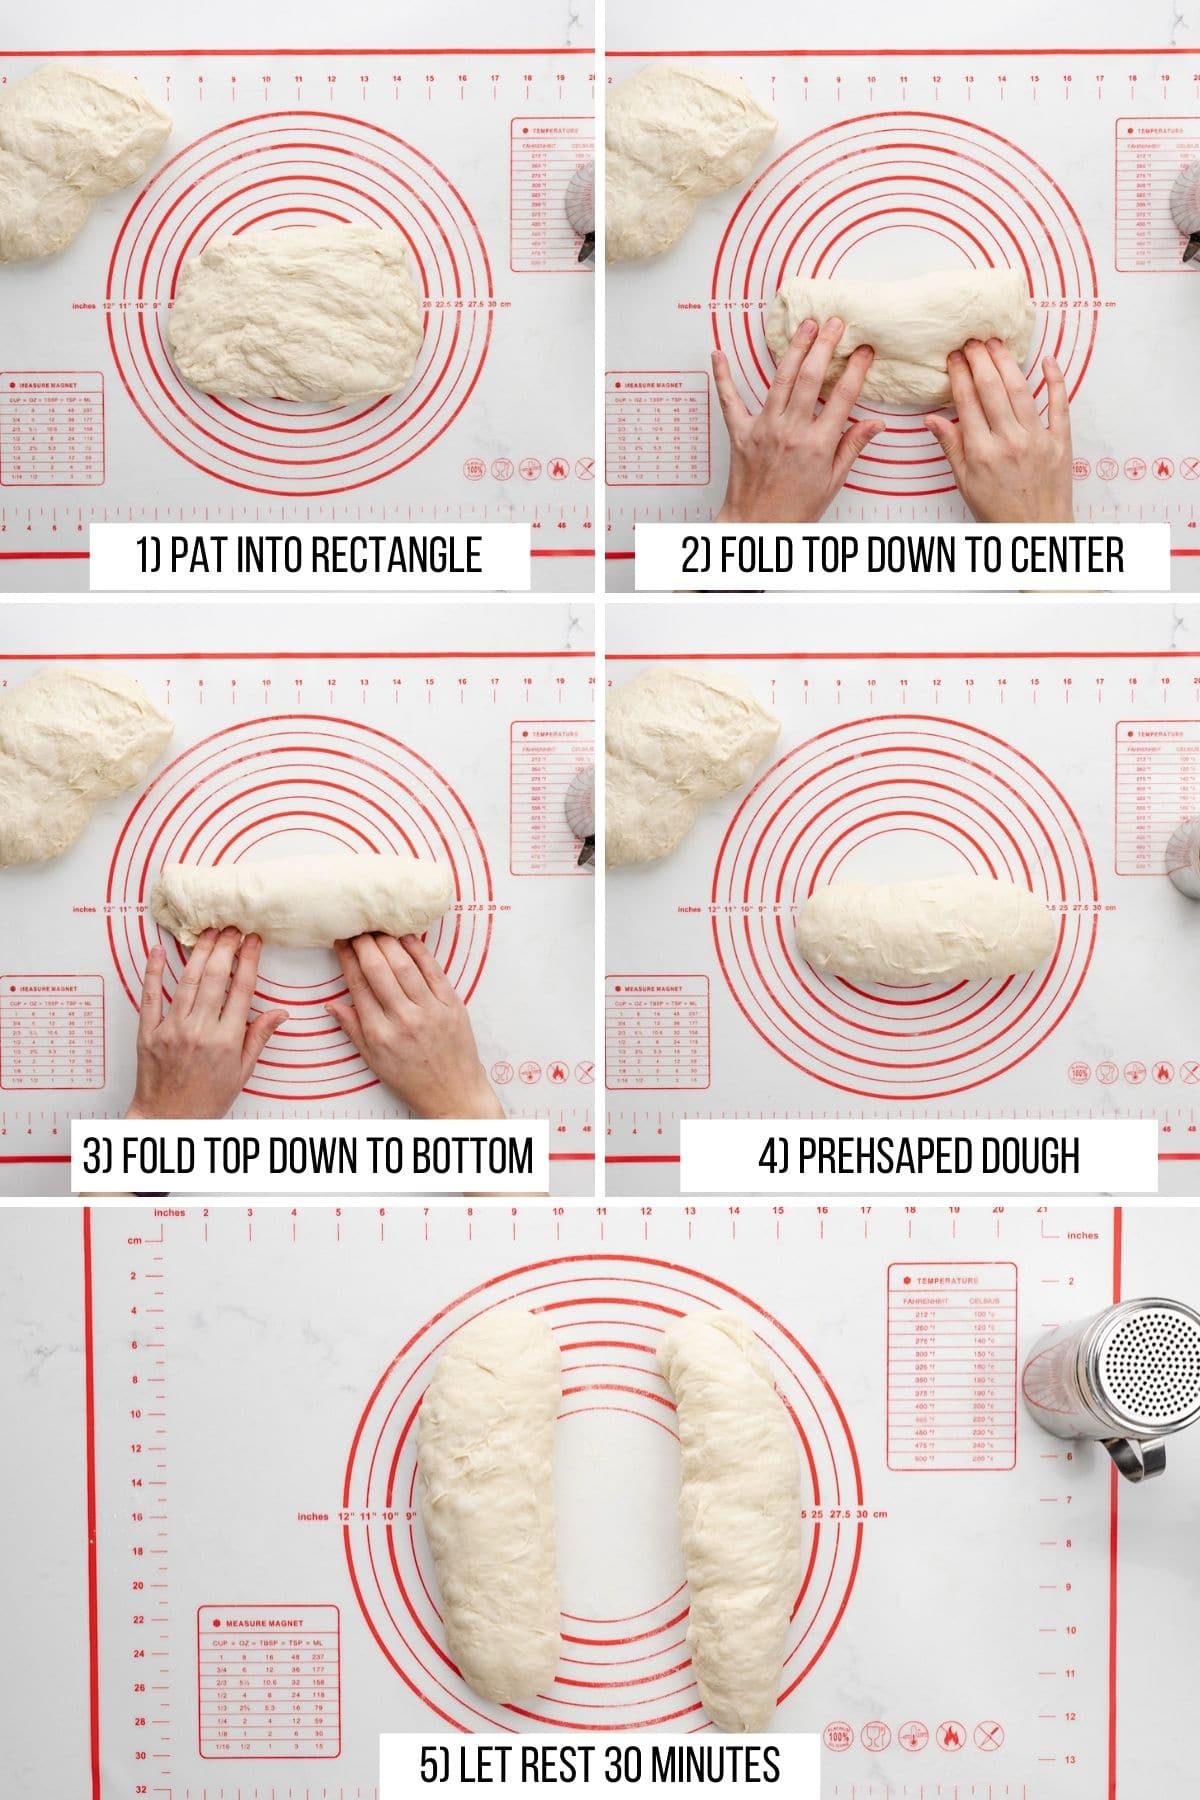 step-by-step photos showing how to pre-shape dough for baguettes